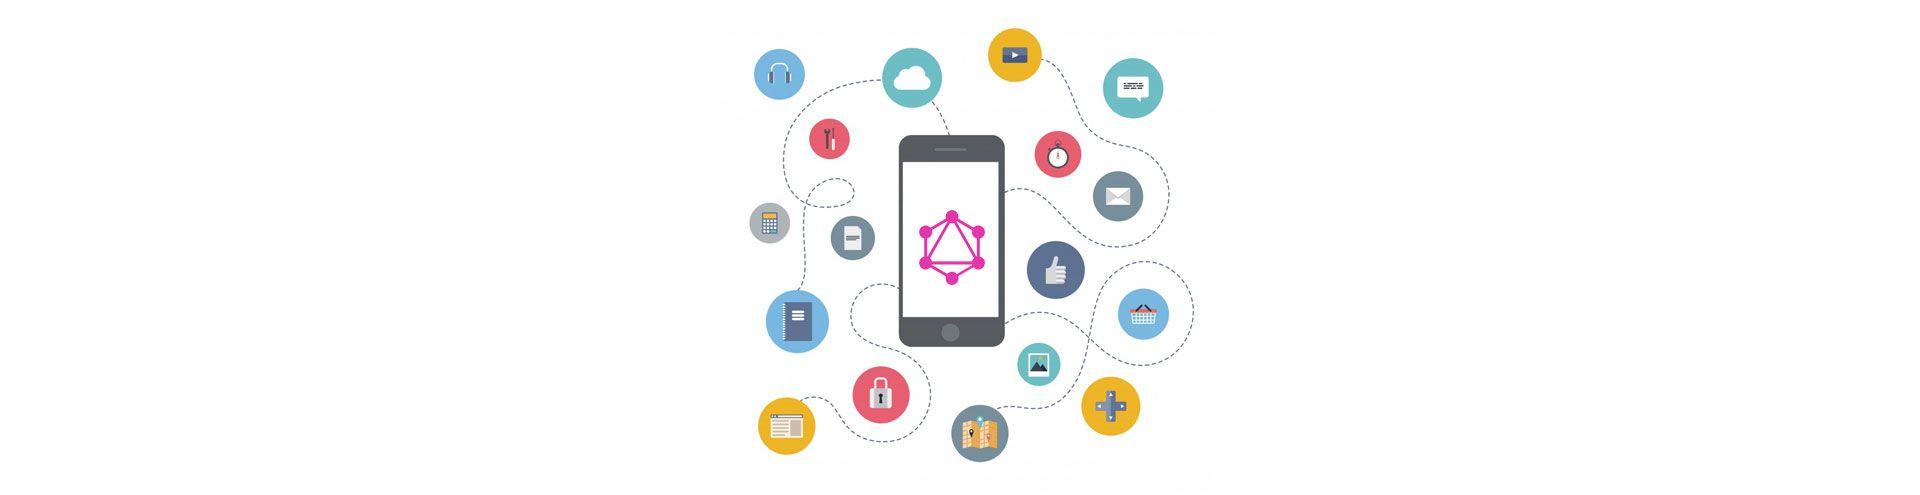 Building Native Mobile Apps with GraphQL